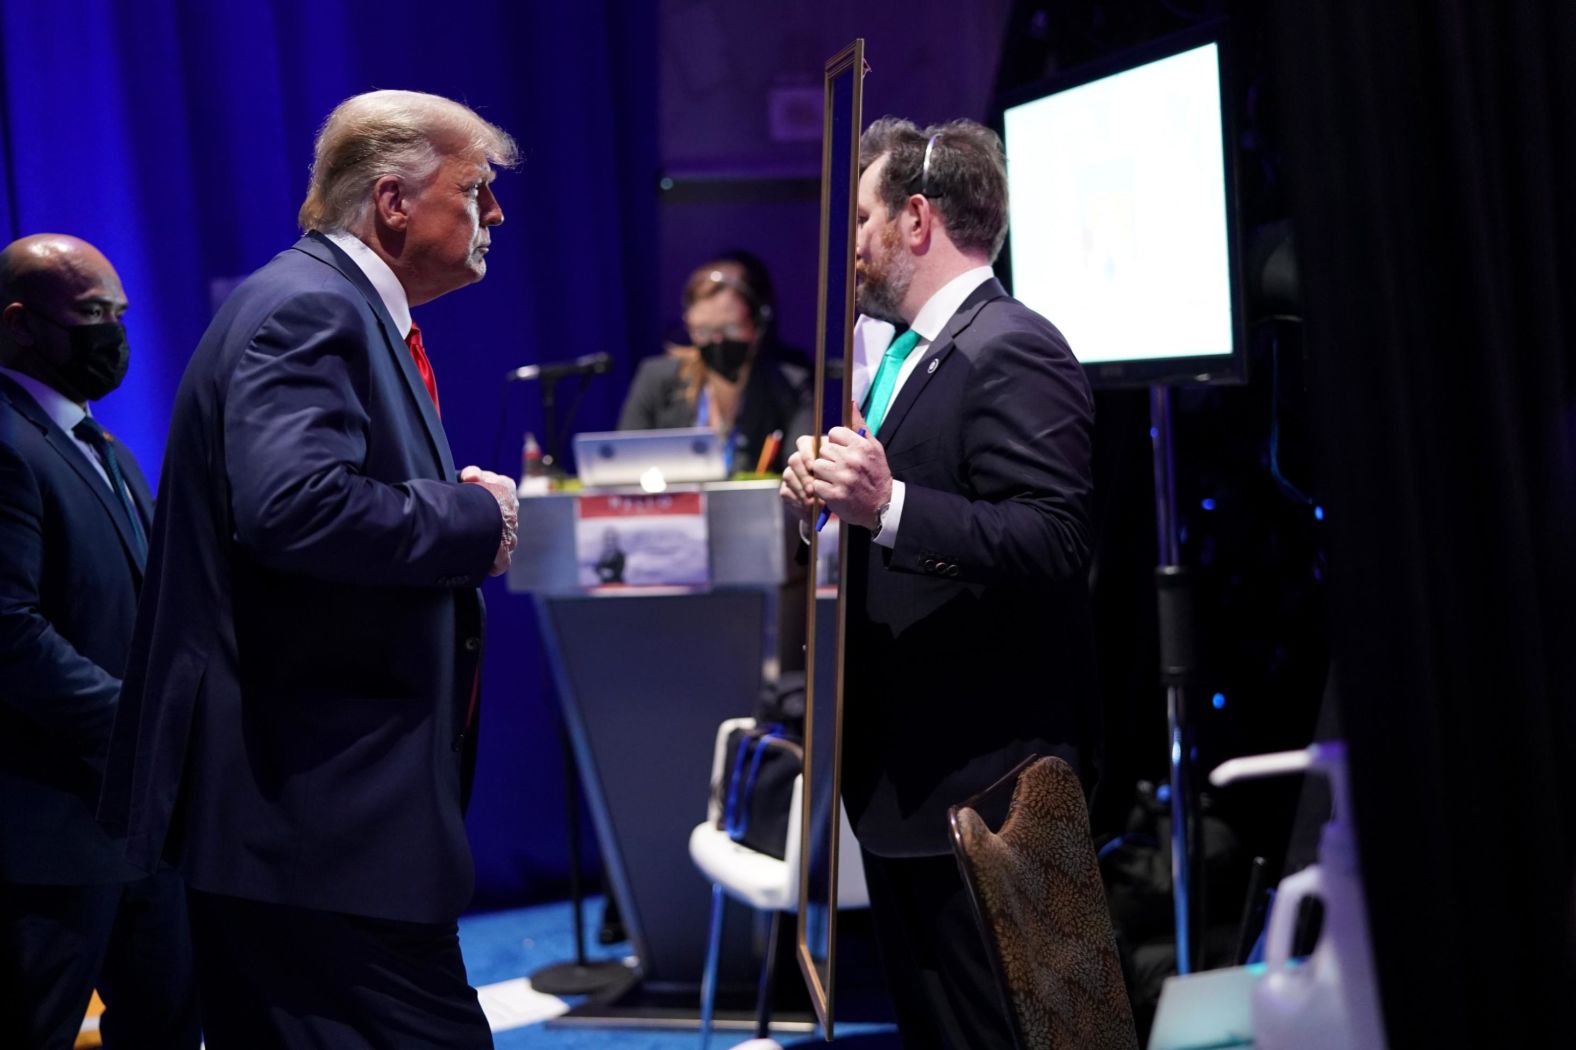 Trump prepares to speak at the Conservative Political Action Conference in Orlando in February 2021. He was making <a href="index.php?page=&url=https%3A%2F%2Fwww.cnn.com%2F2021%2F03%2F01%2Fpolitics%2Fcpac-2021-trump-speech-american-democracy%2Findex.html" target="_blank">his first public remarks since leaving the White House.</a>